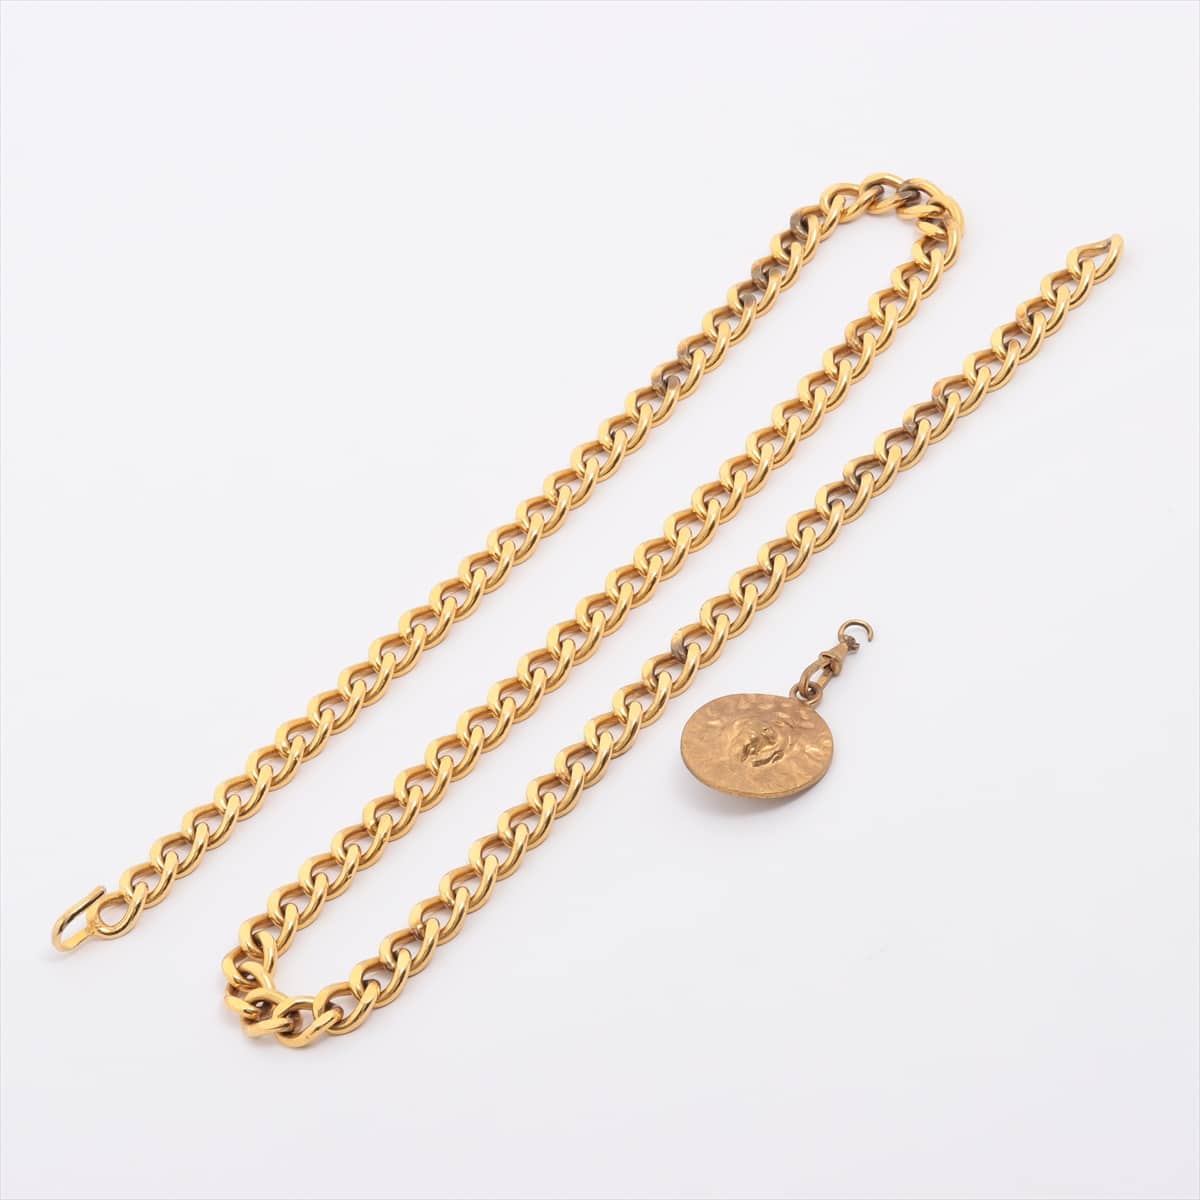 Chanel Chain belt GP Gold Charms outside the company